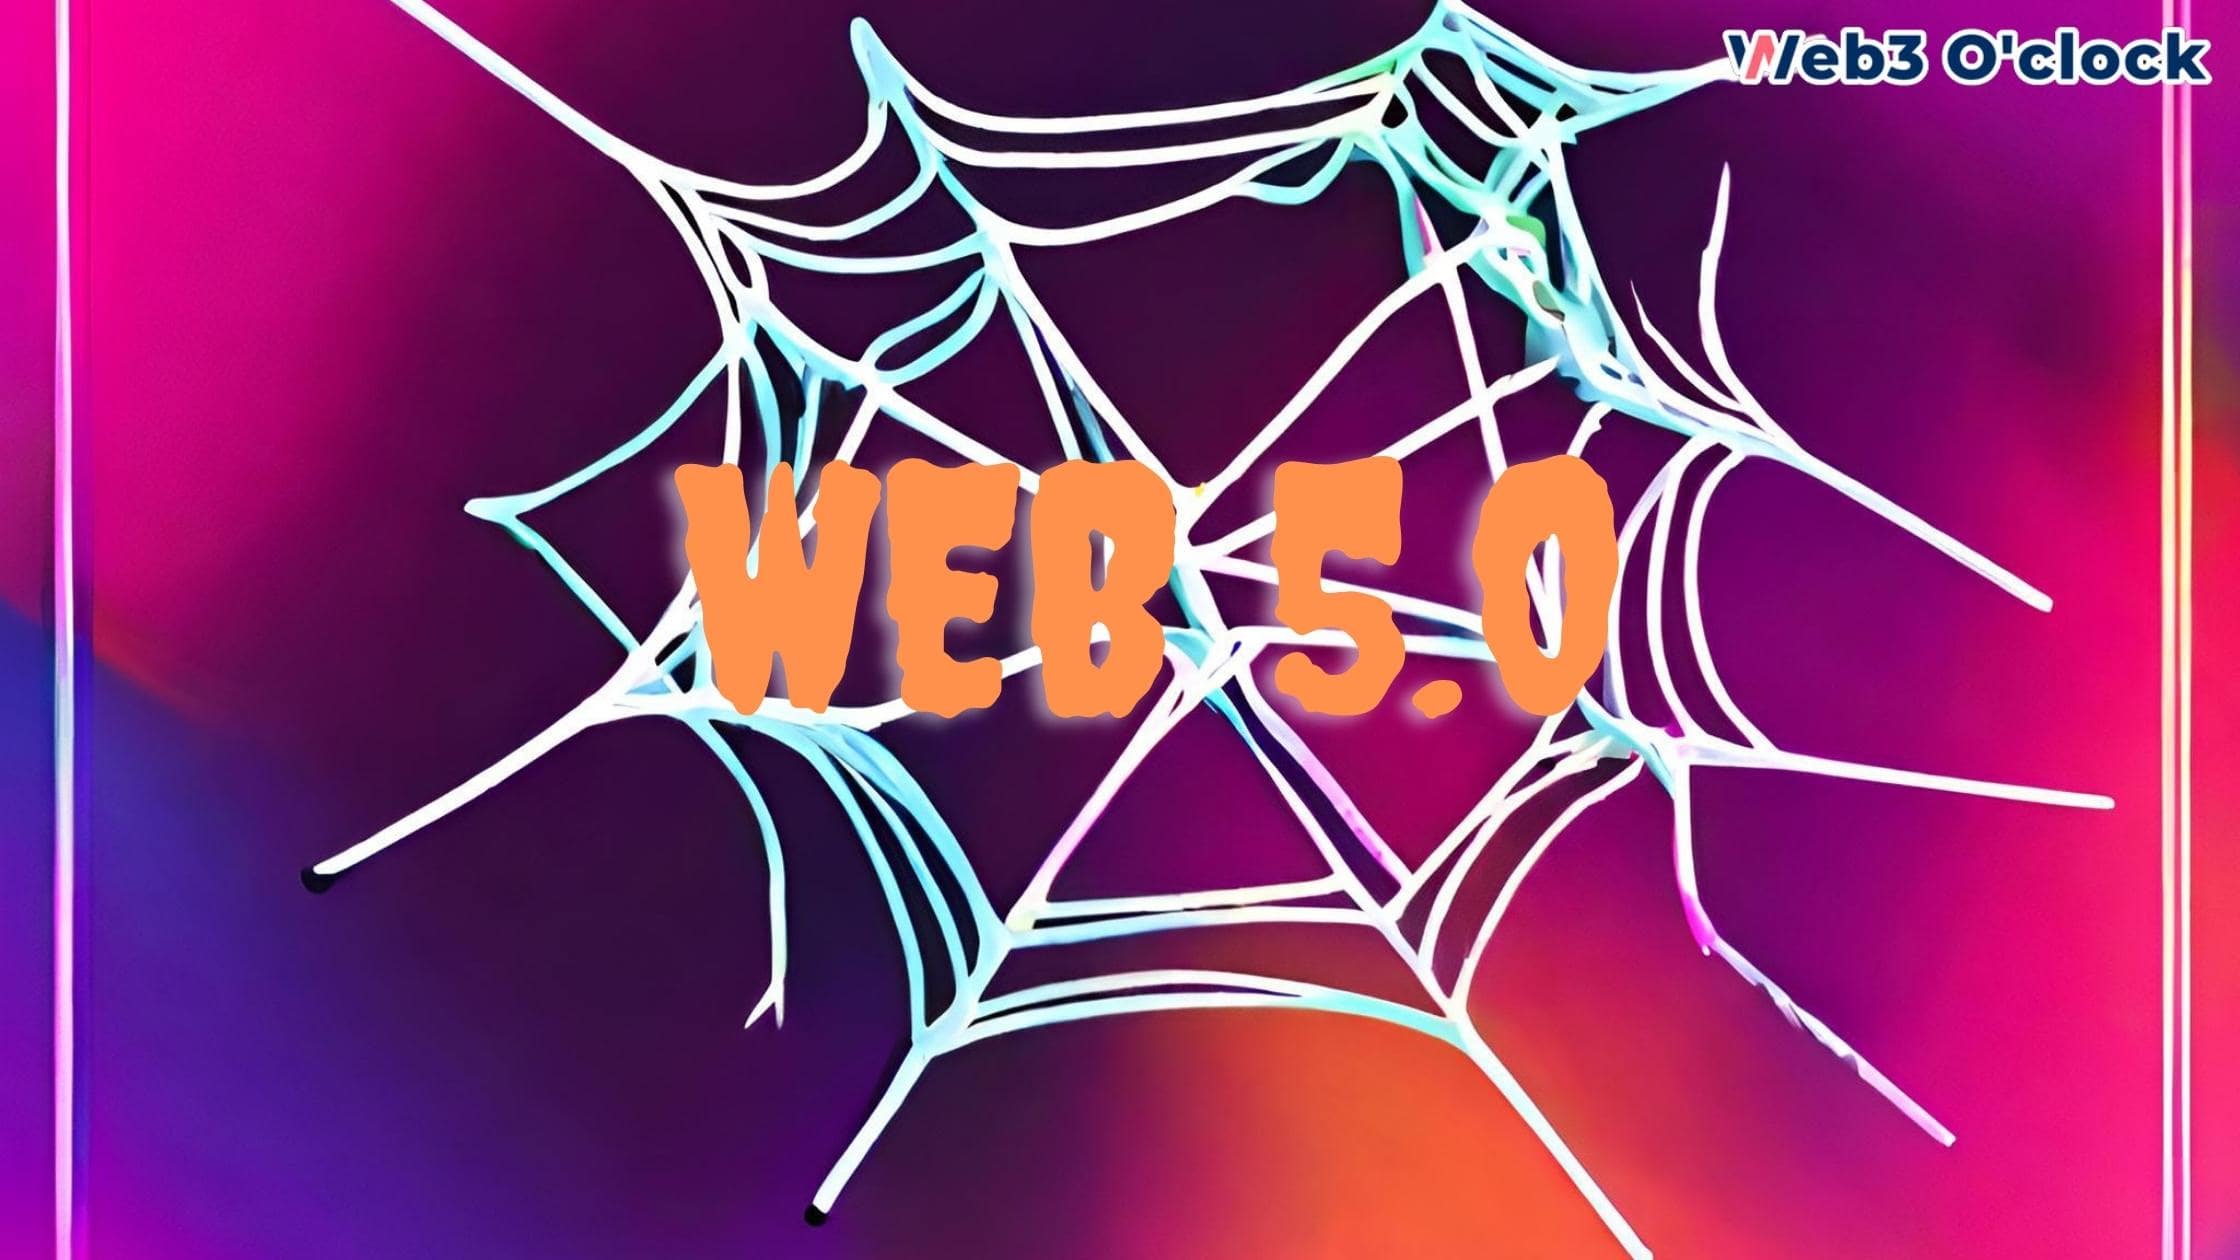 Web5 Unveiled by web3oclock